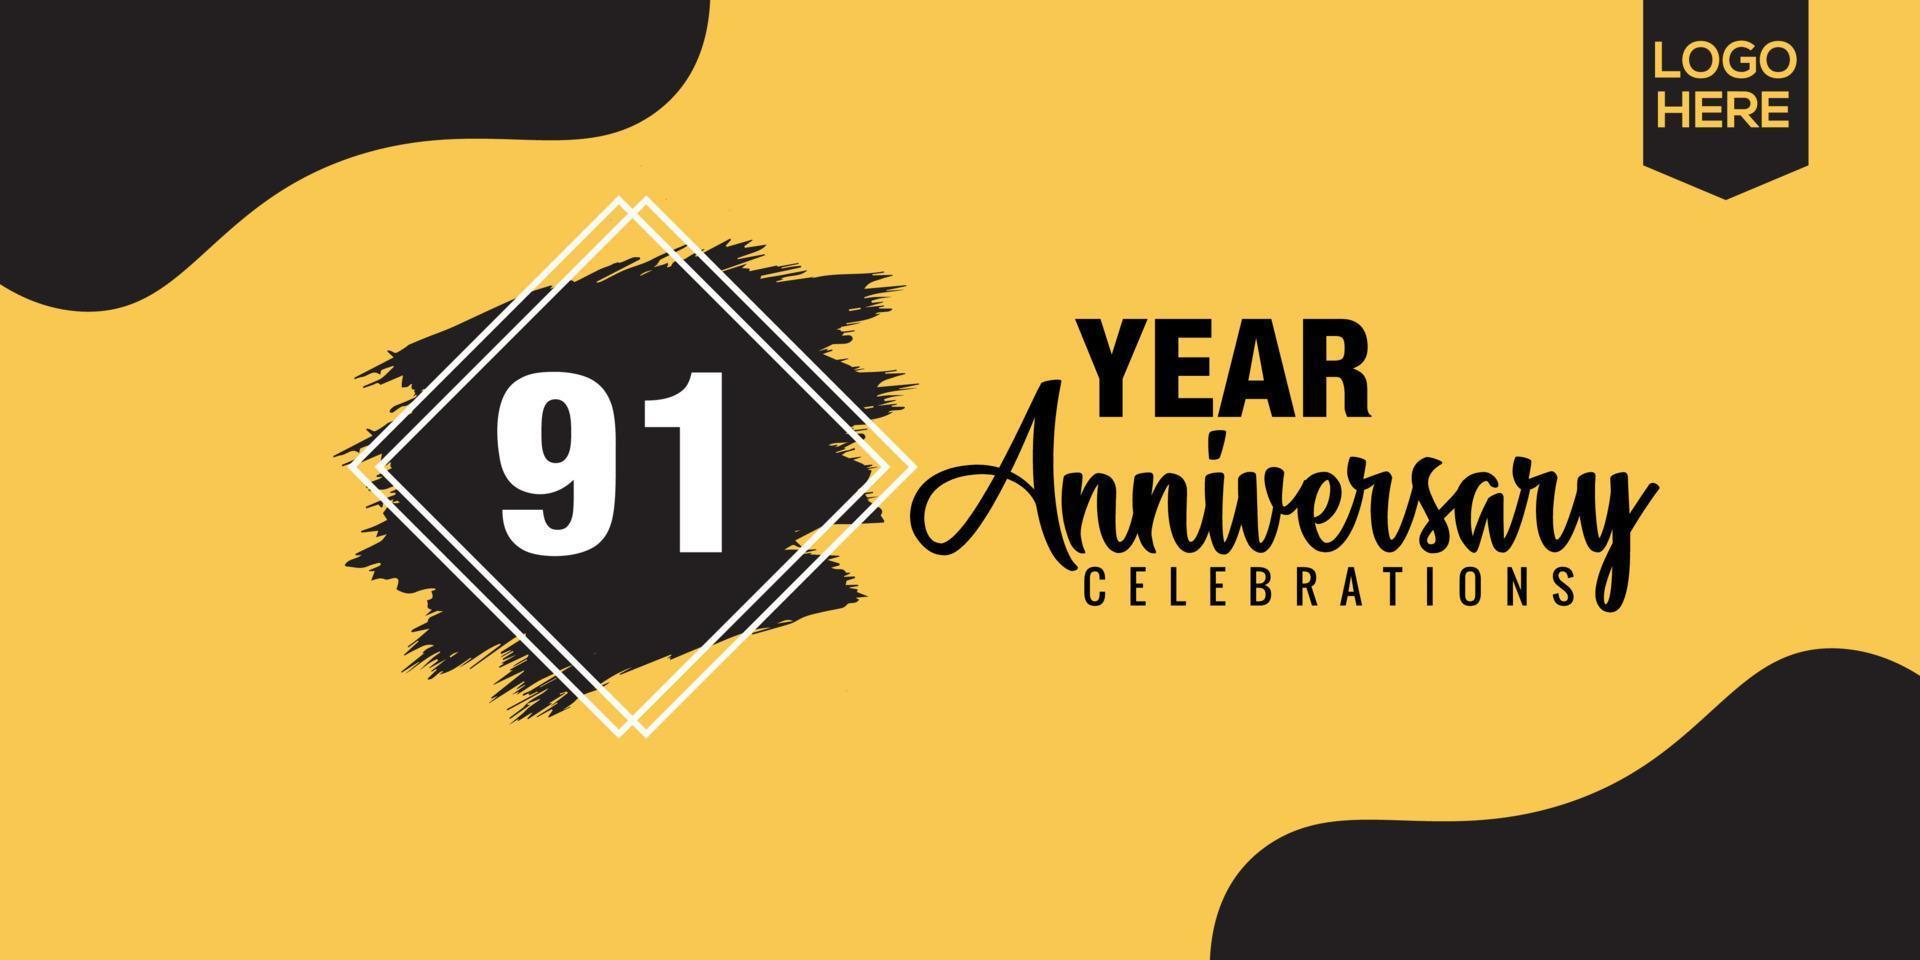 81st years anniversary celebration logo design with black brush and yellow color with black abstract vector illustration